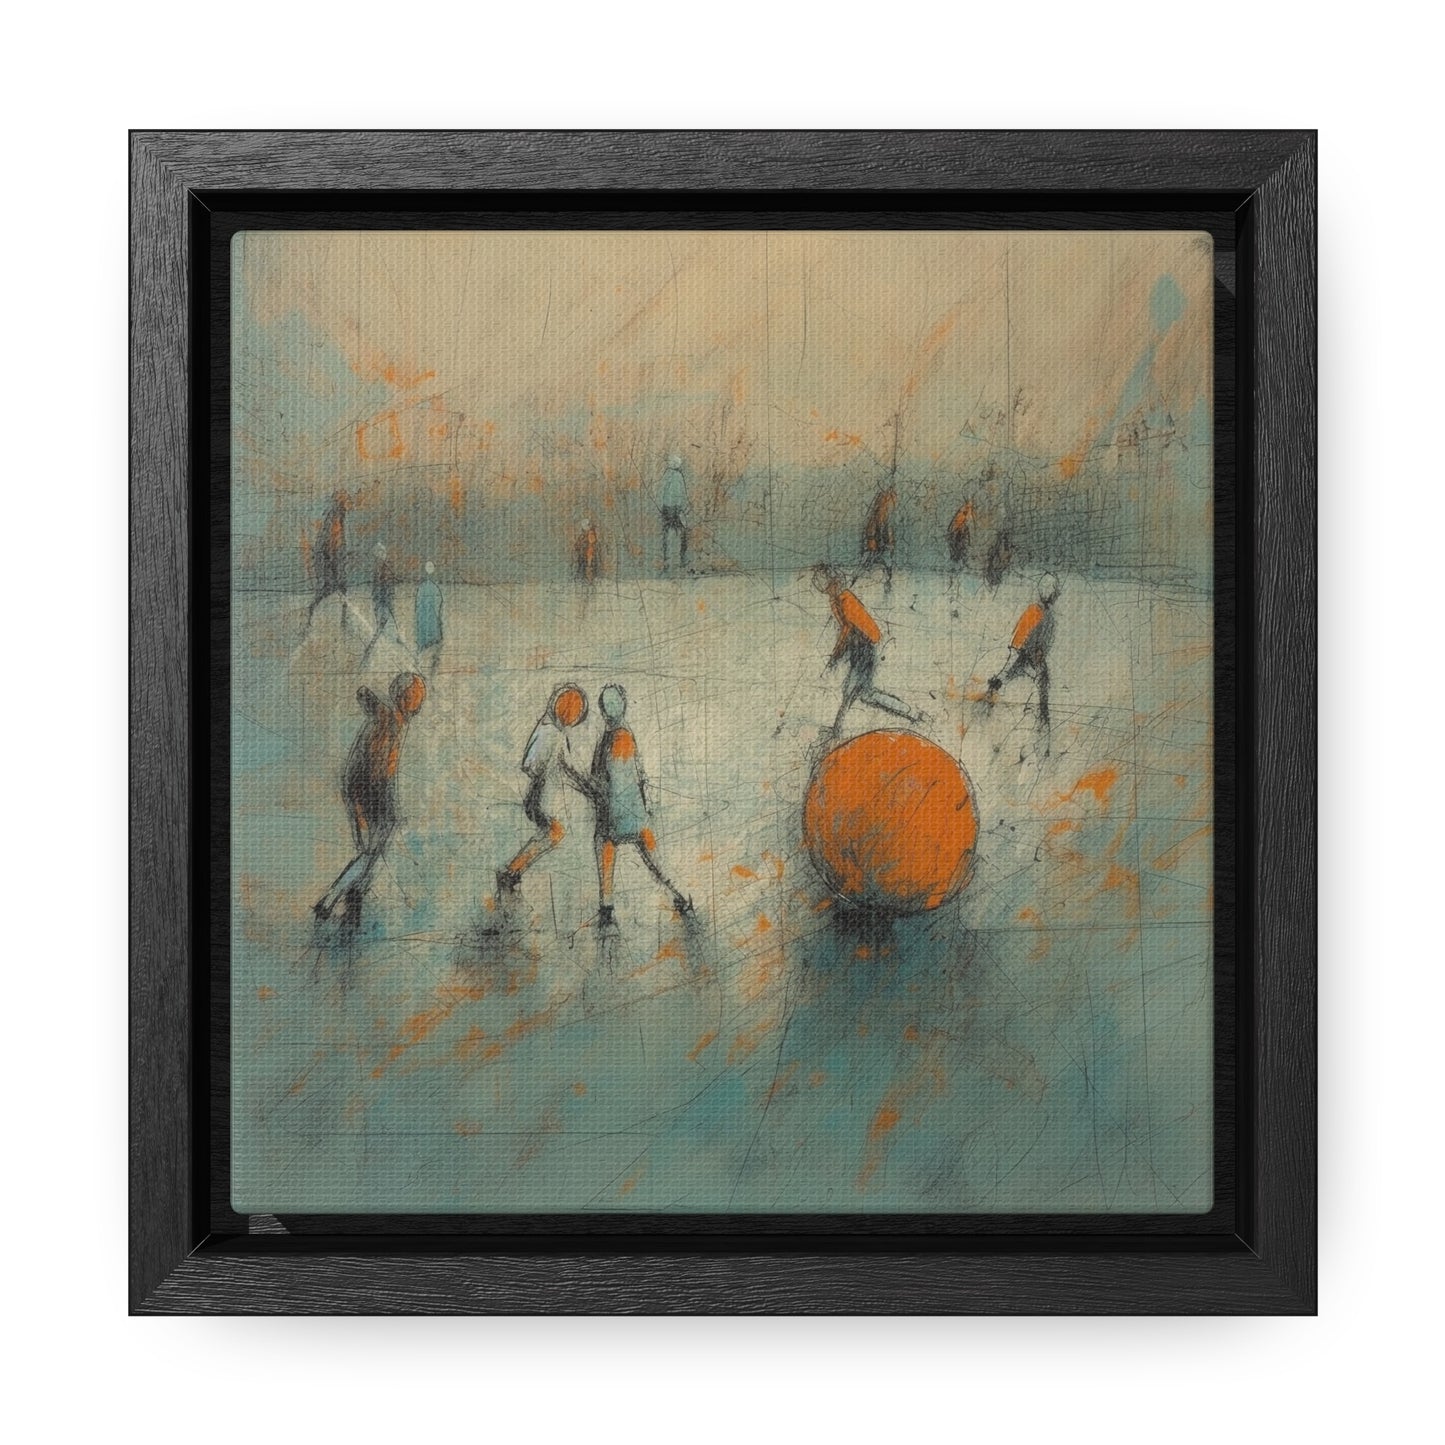 Childhood 40, Gallery Canvas Wraps, Square Frame